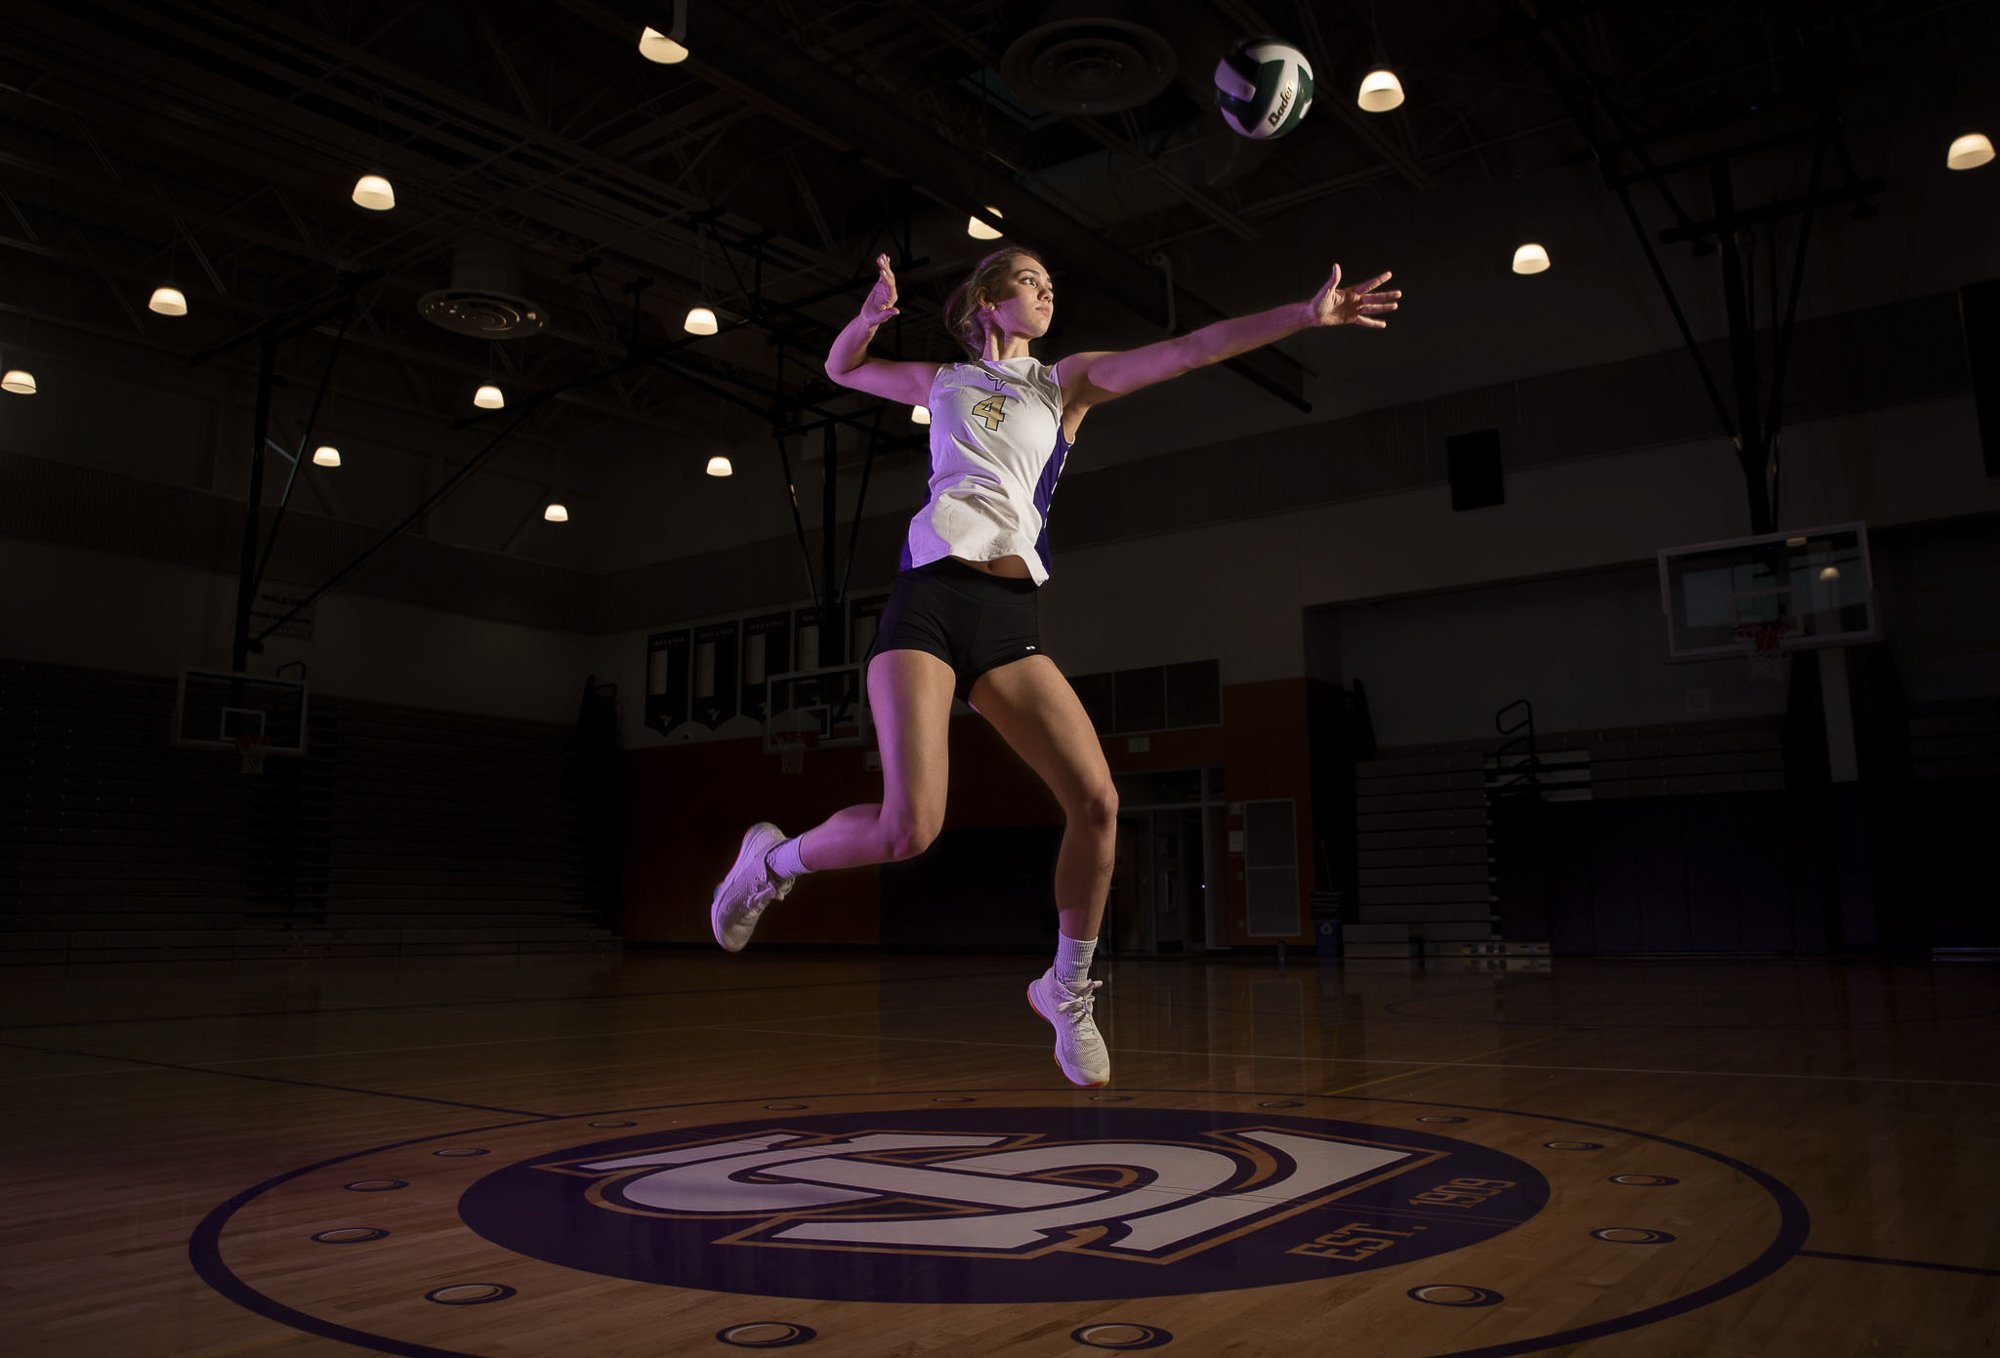  Lake Stevens senior outside hitter Bella Christensen is The Herald’s Volleyball Player of the Year. The hard-hitting Air Force commit compiled a stellar senior season and starred in Lake Stevens’ run to a 2nd-place state trophy. 